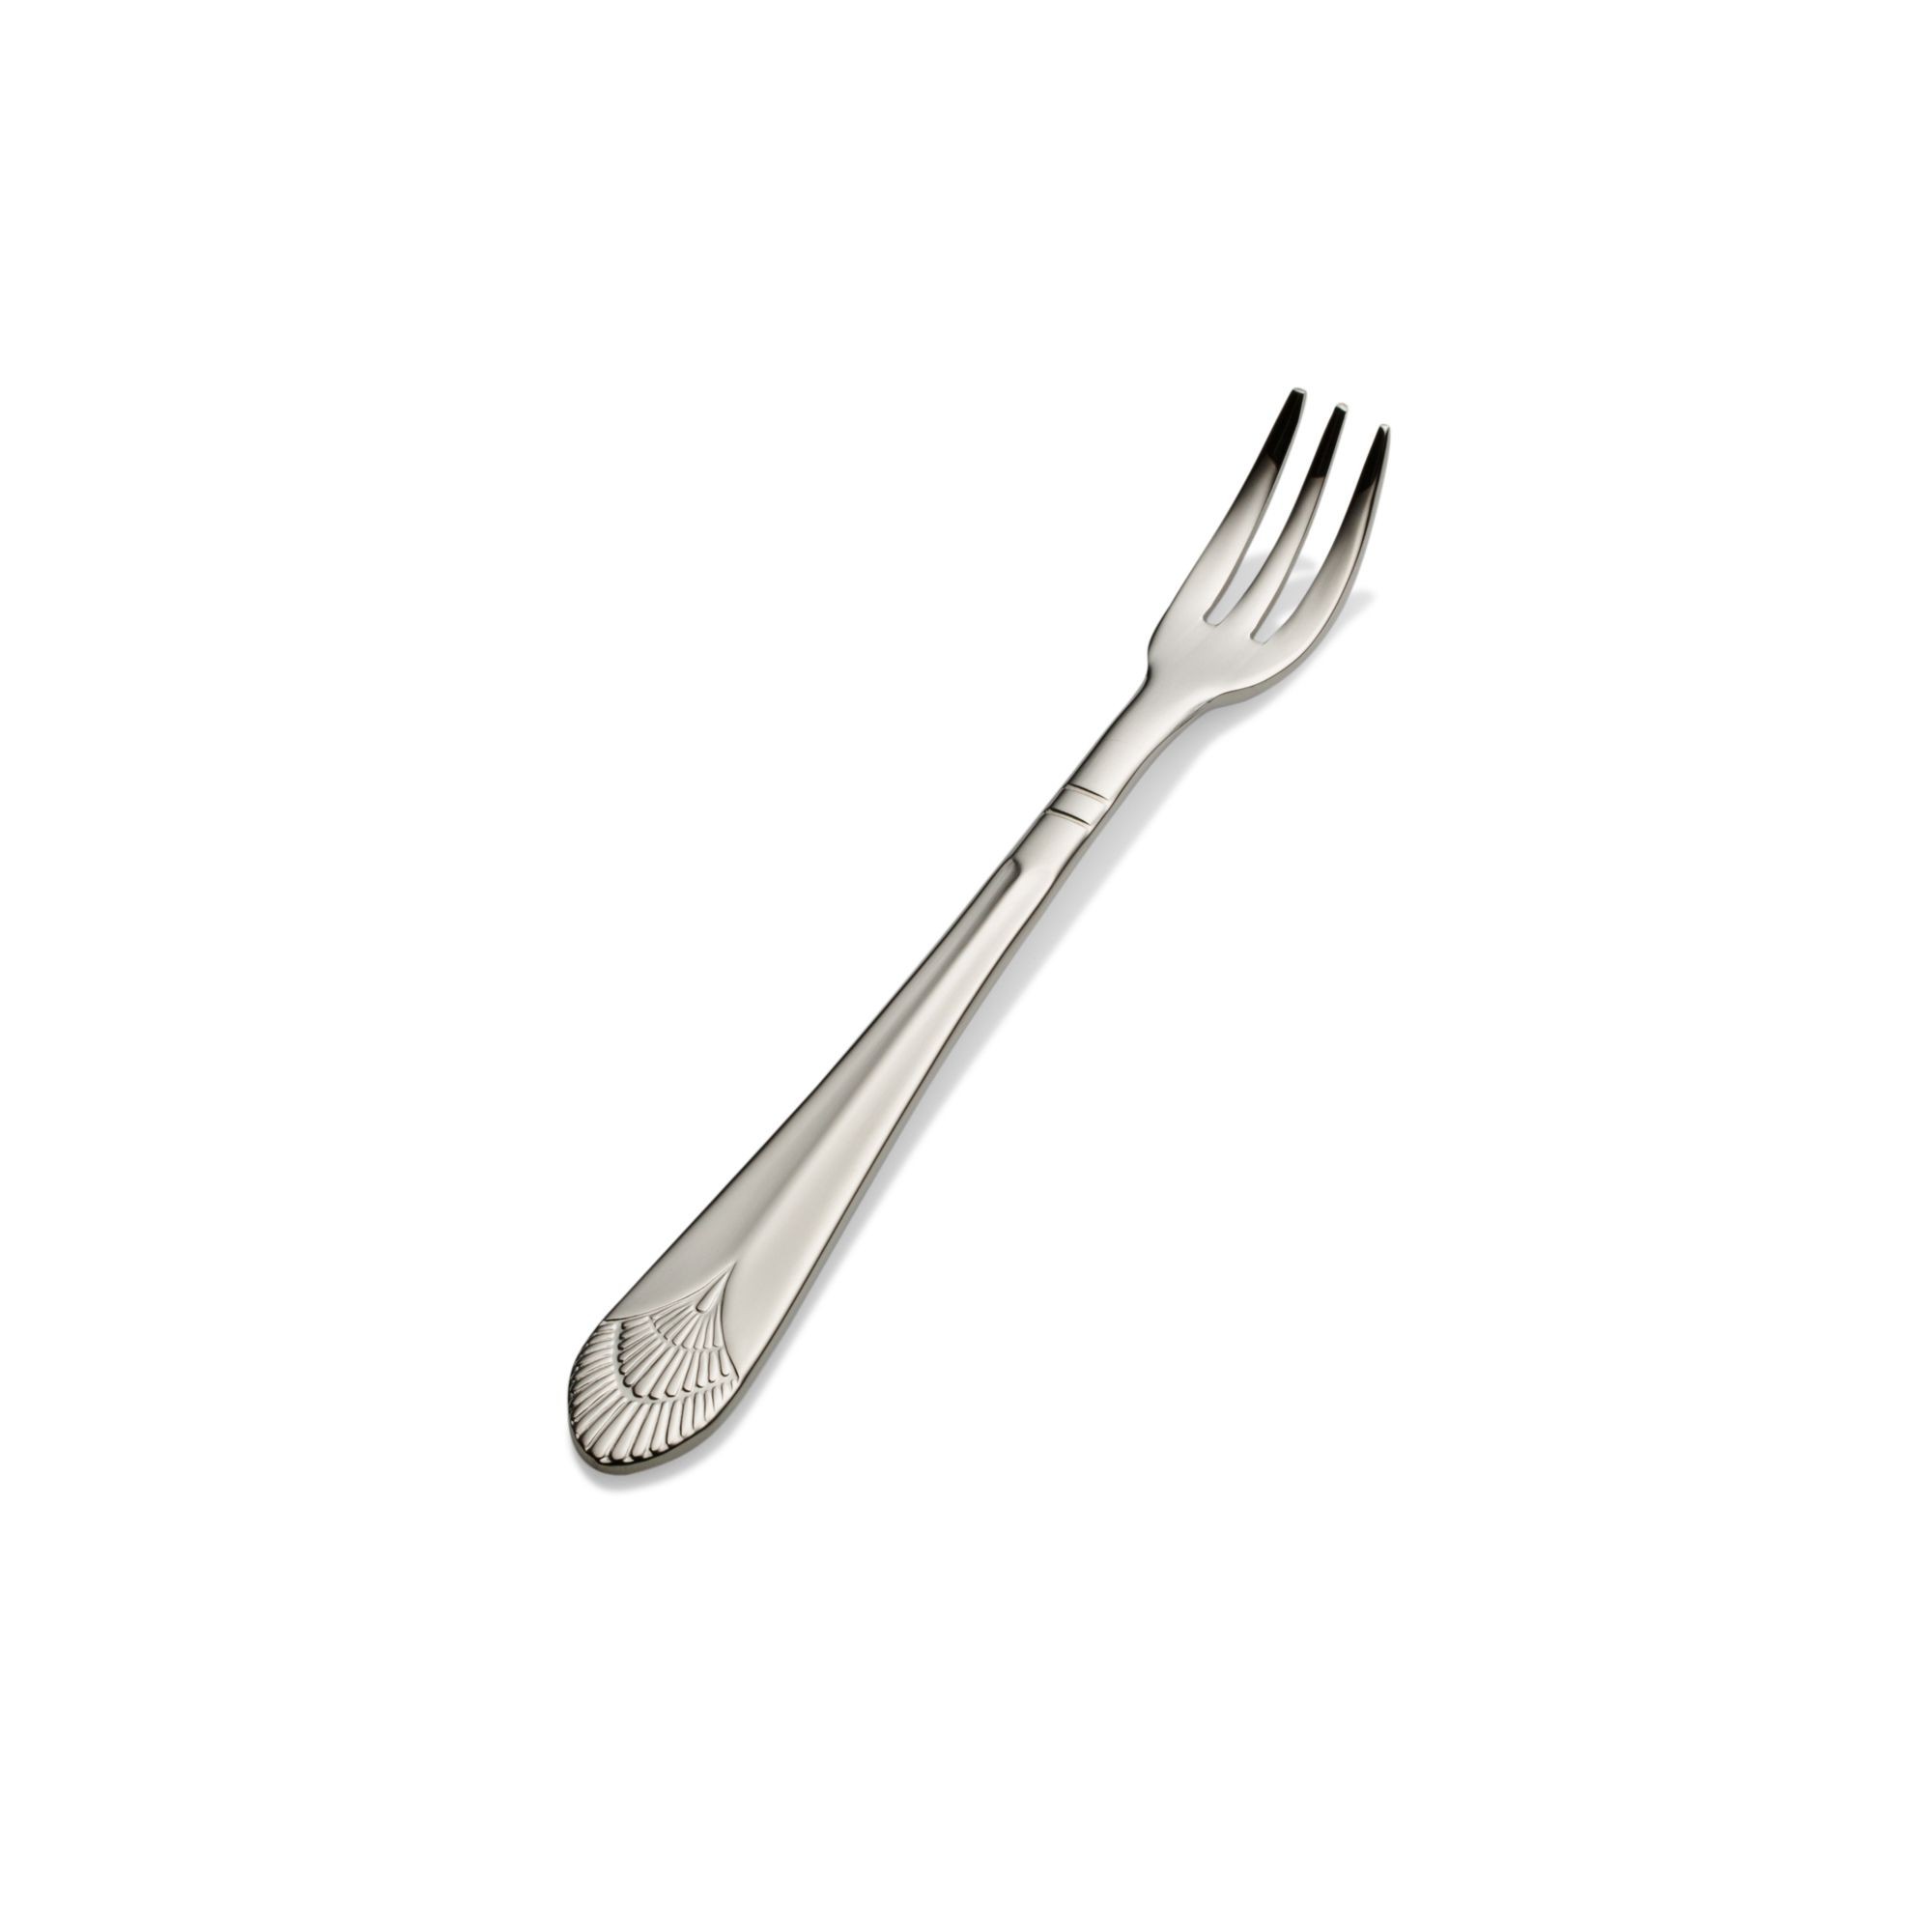 Bon Chef S1708 Nile 18/8 Stainless Steel Oyster Fork